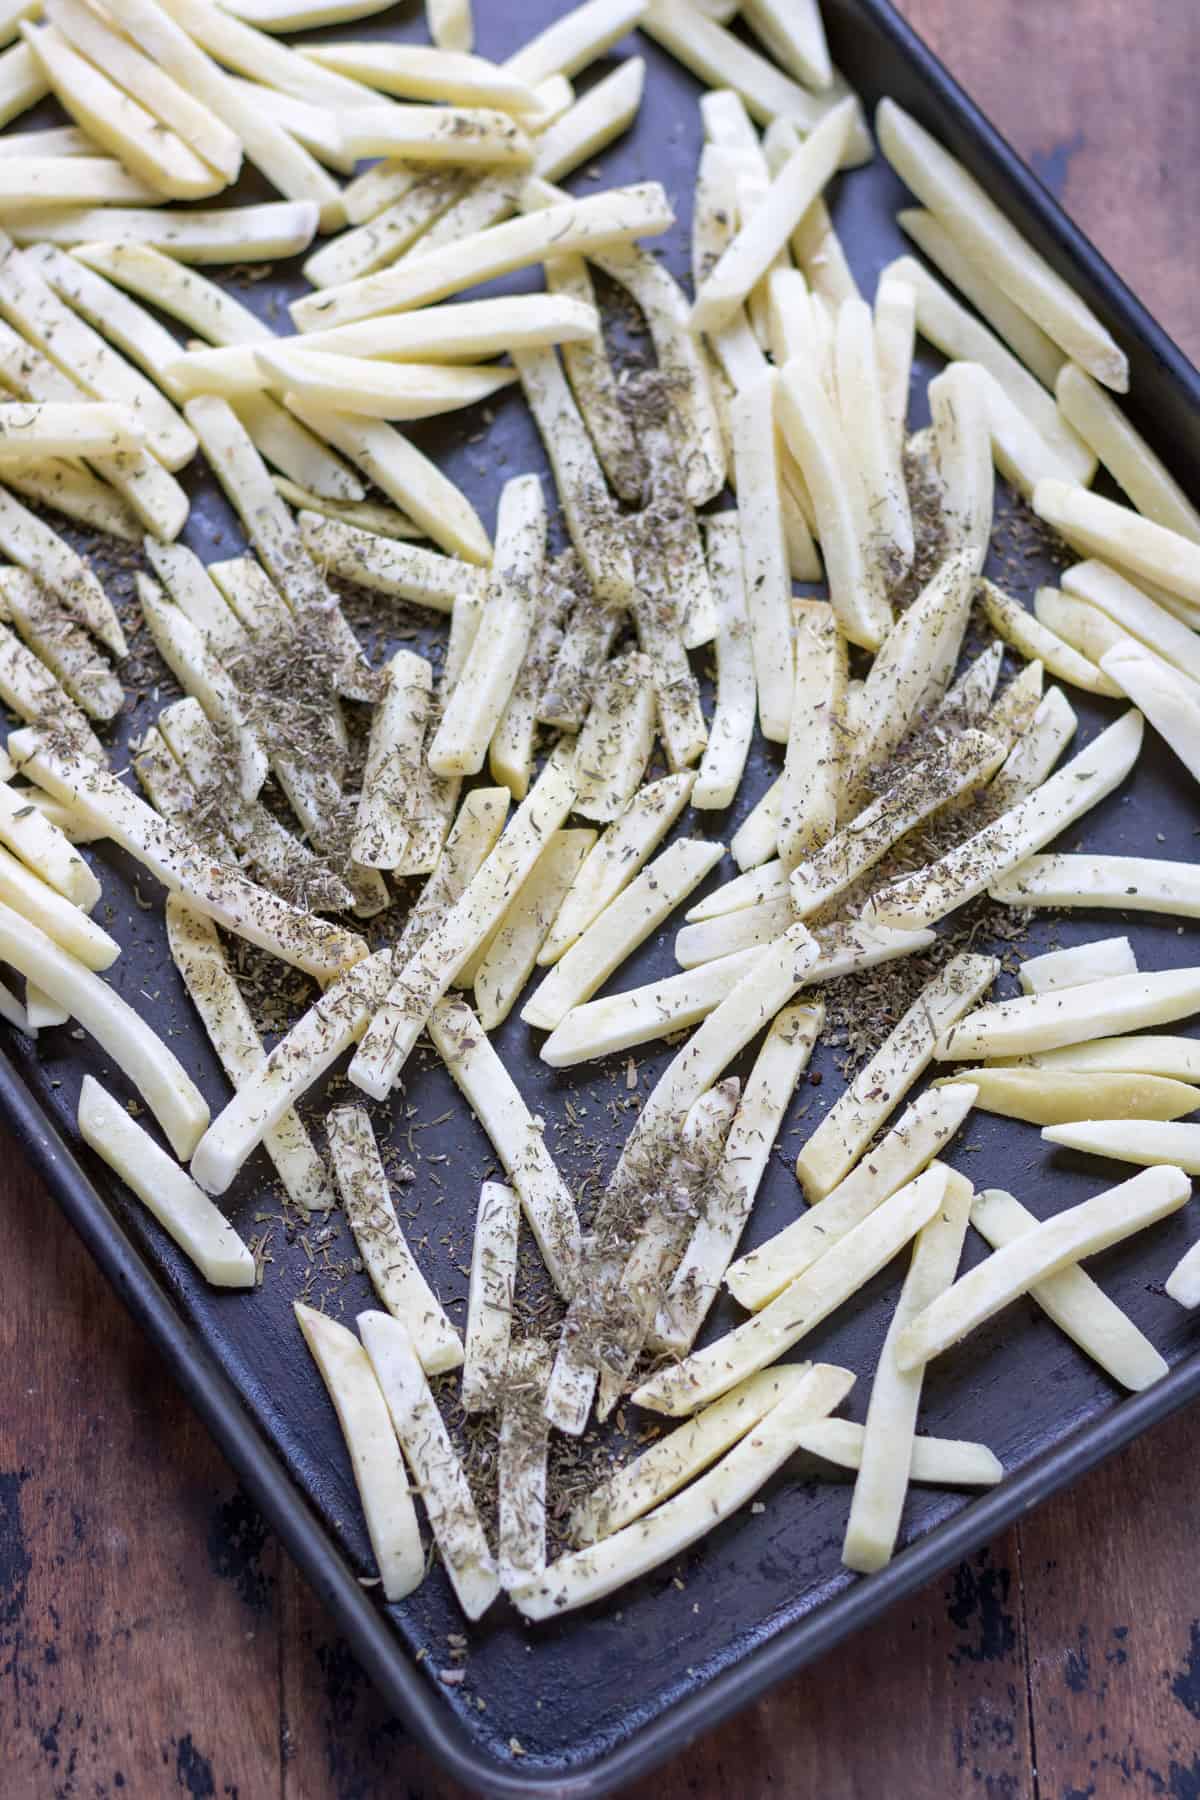 A baking tray of fries seasoned with dried sage, ready to cook.